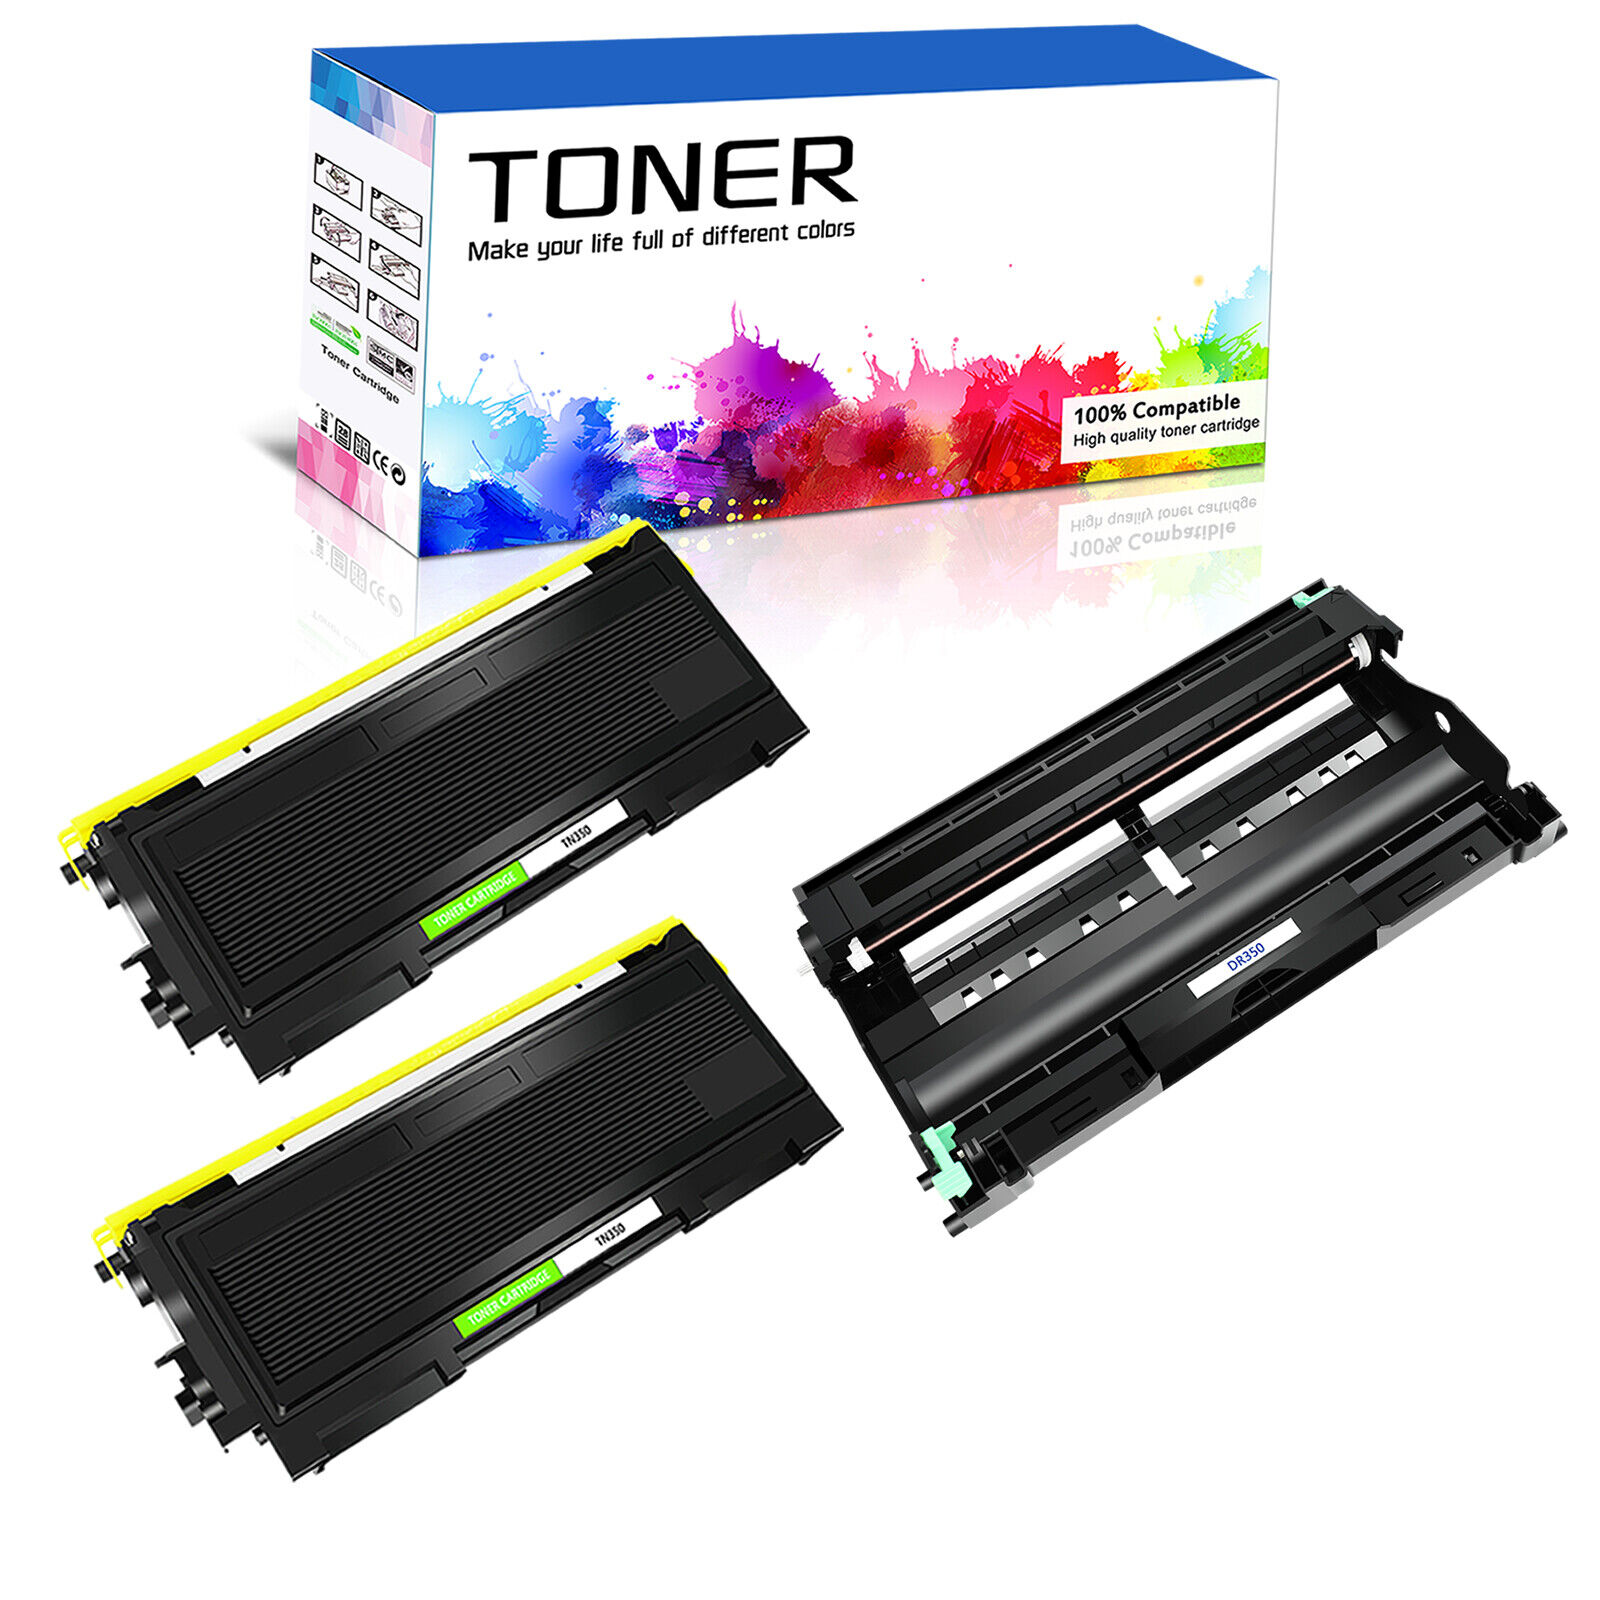 2PK TN350 Toner +1PK DR350 Drum Unit For Brother Intellifax-2820 2920 MFC-7220